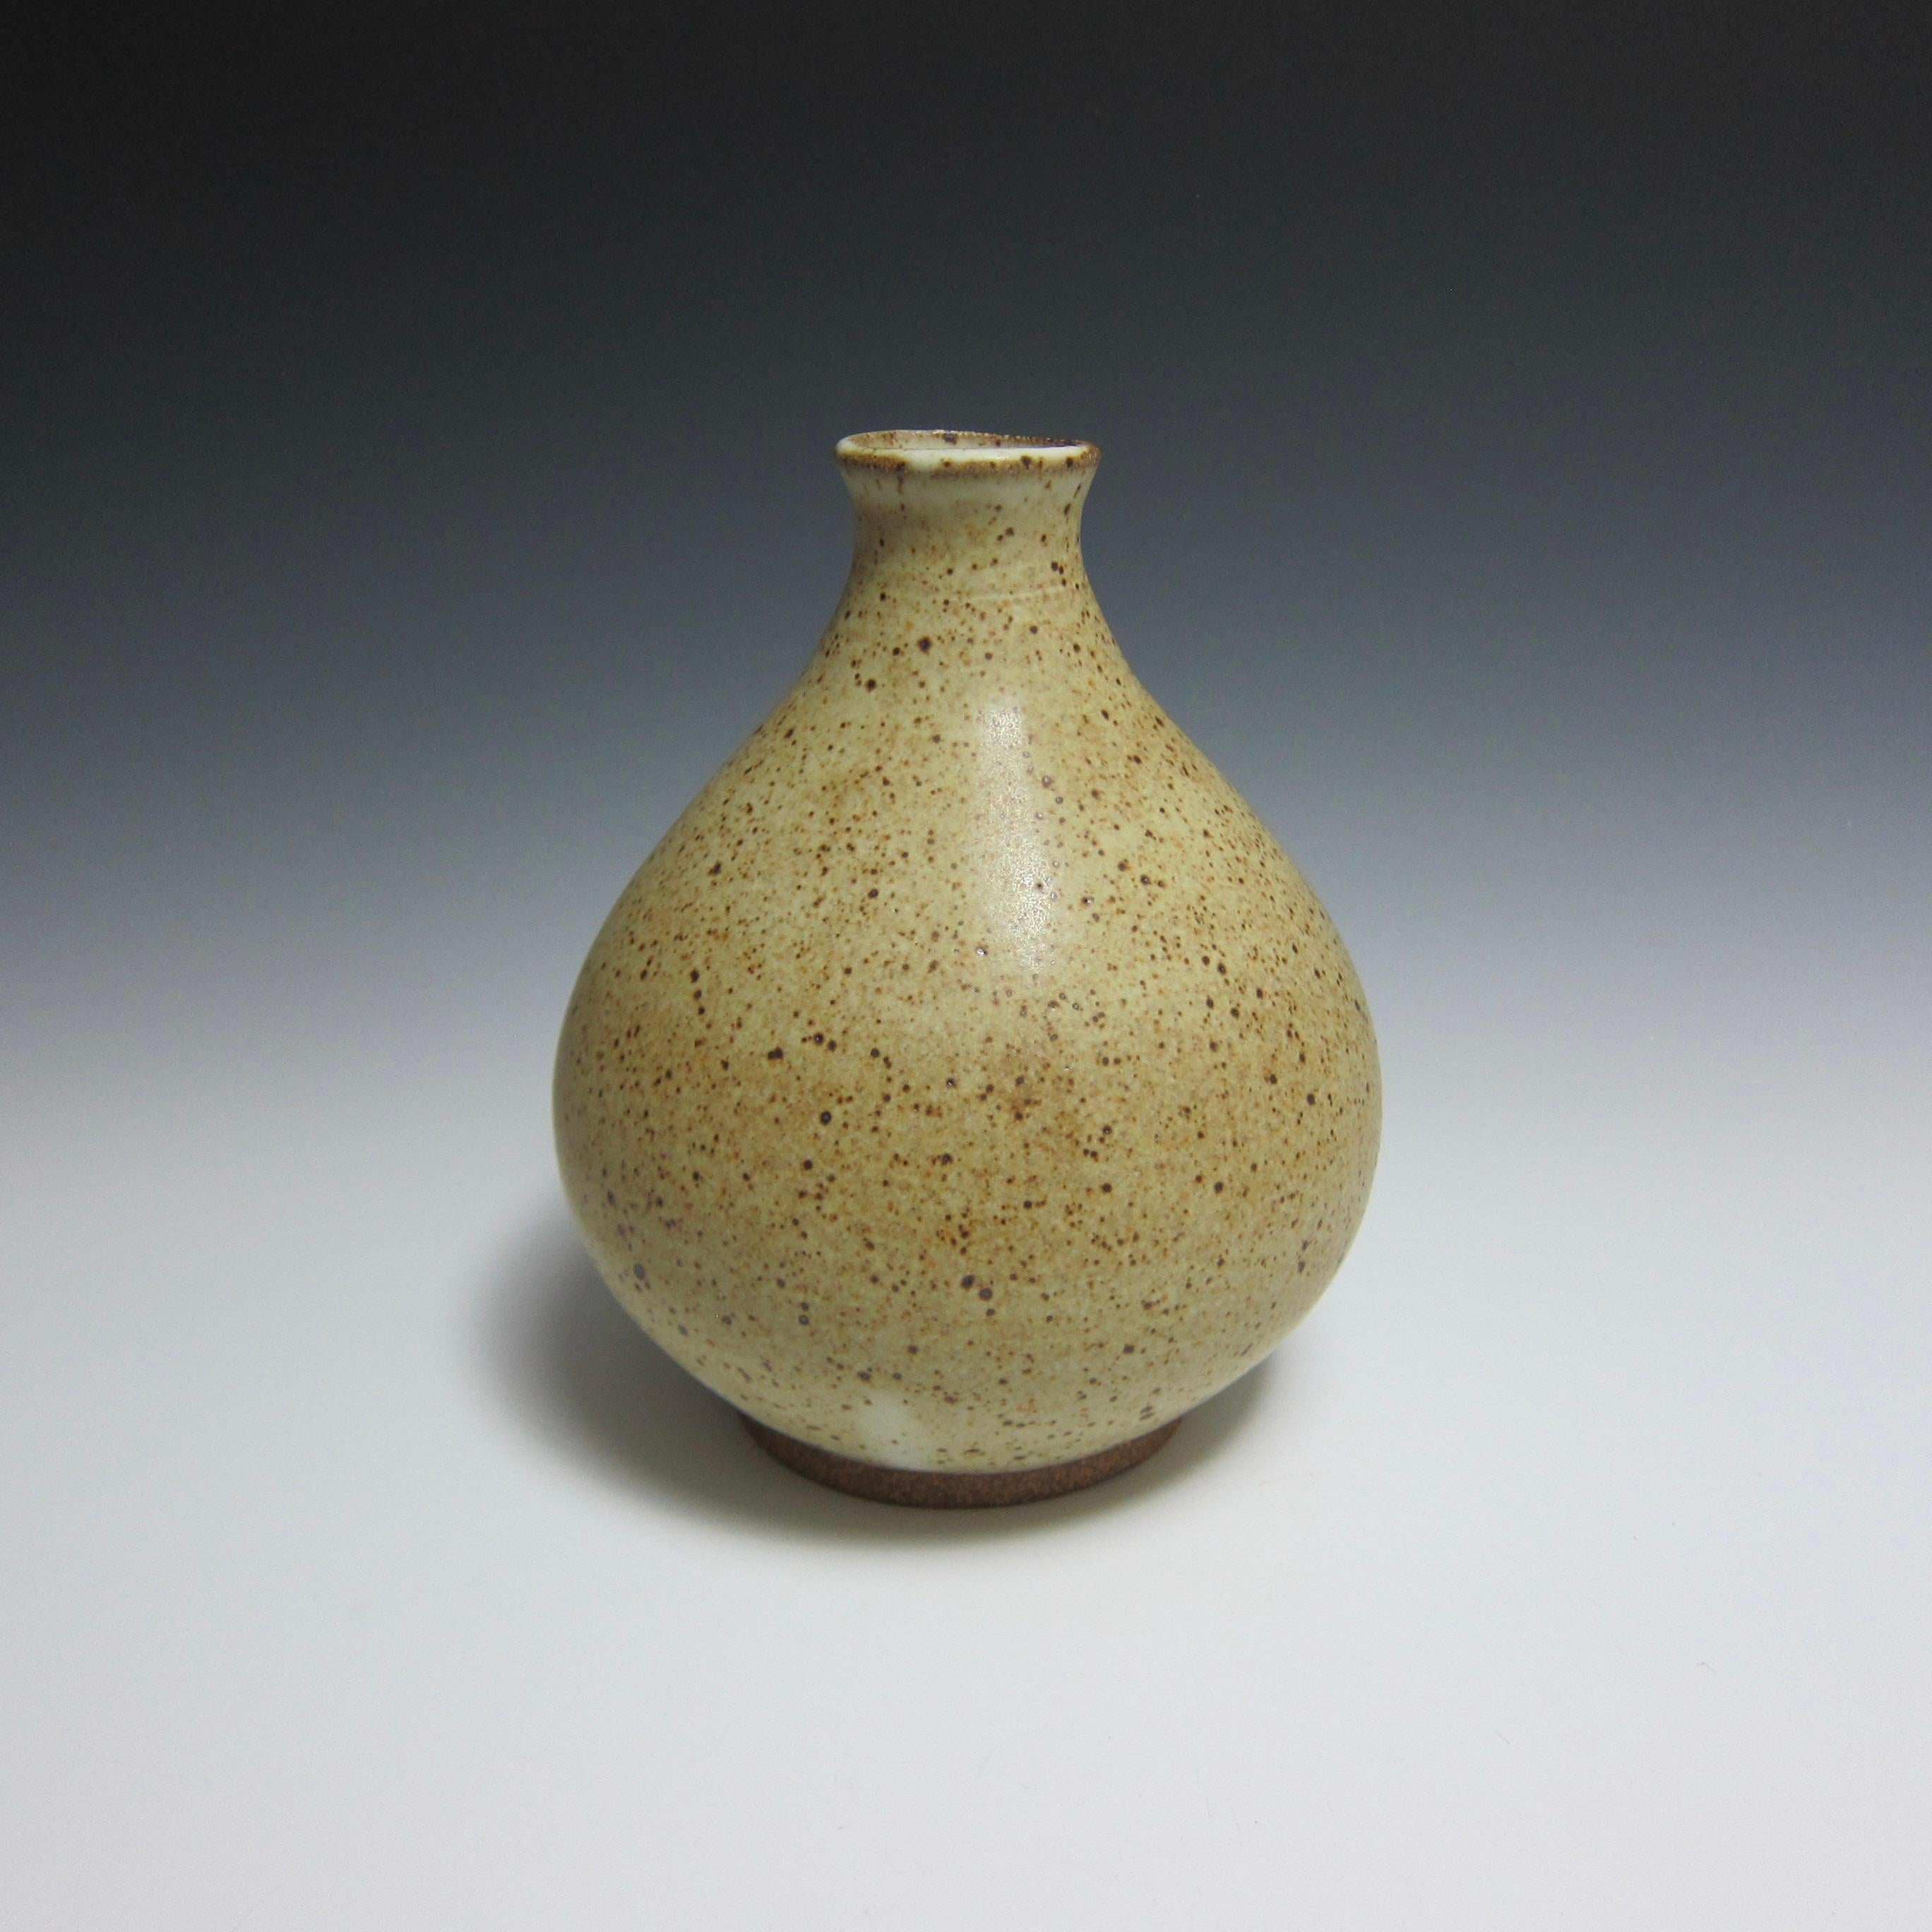 Wheel Thrown Ceramic Vase by Jason Fox

Part of his Flower Bottle Series, American contemporary ceramic artist Jason Fox borrows inspiration from the antique Korean silhouette of the same name to create a vase perfect for both wet and dry flower